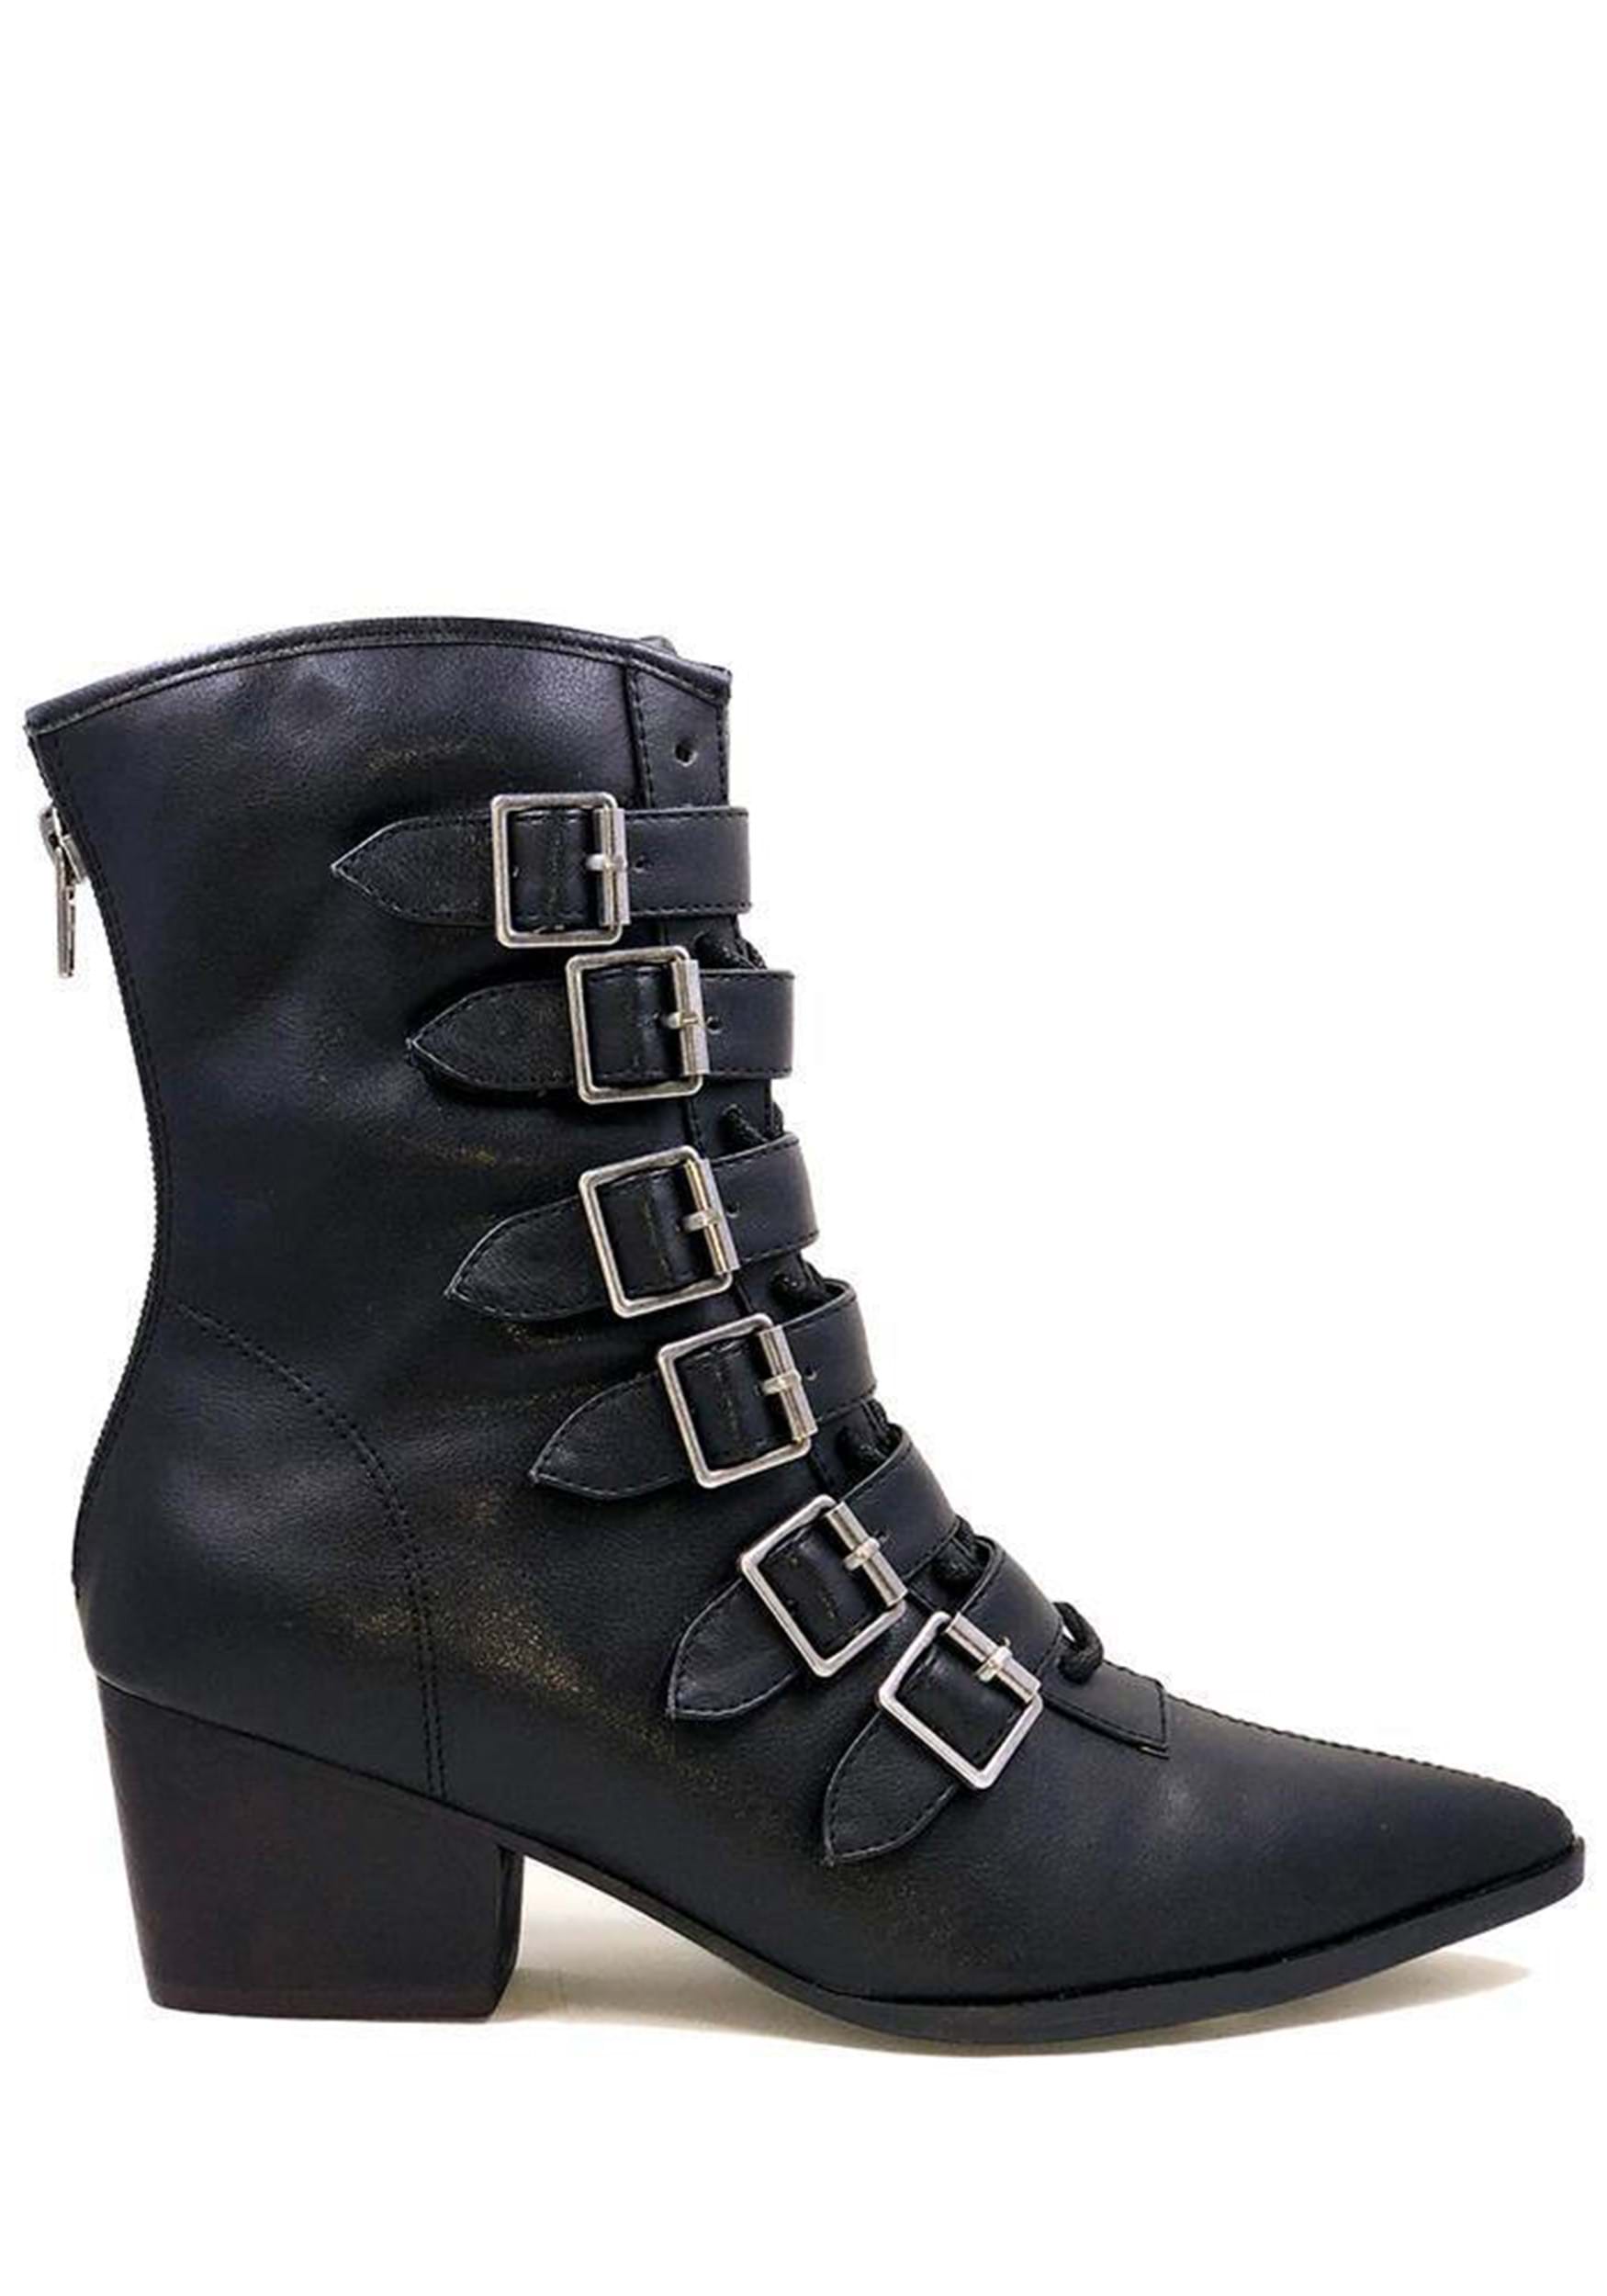 Image of Black Buckle Women's Boots ID SVCOVENBOOT-BK-9